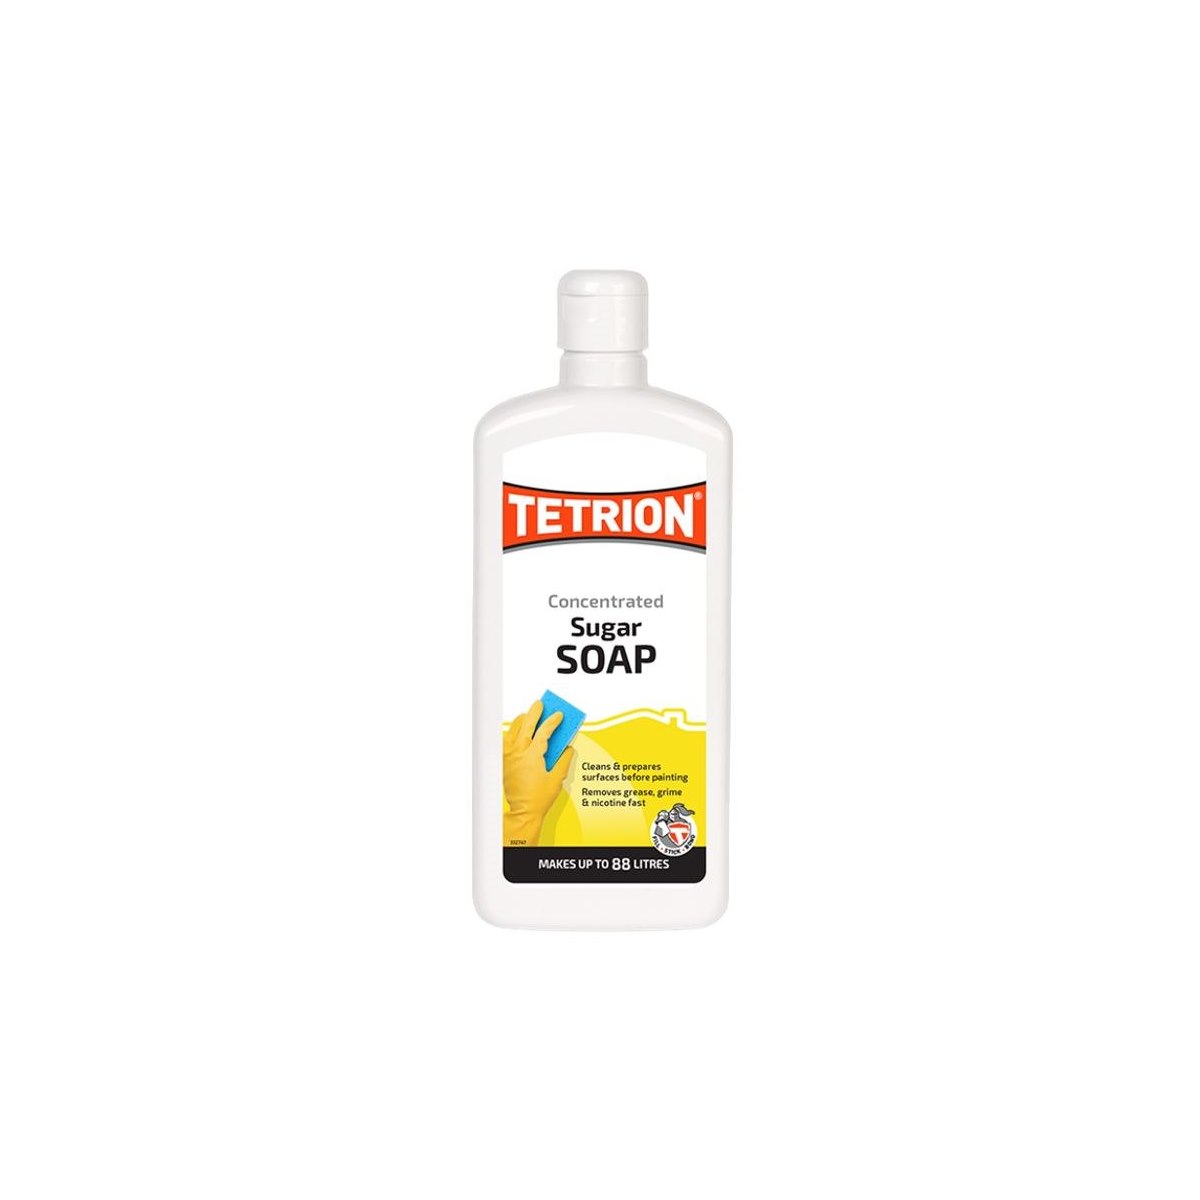 Tetrion Sugar Soap Concentrated 1L